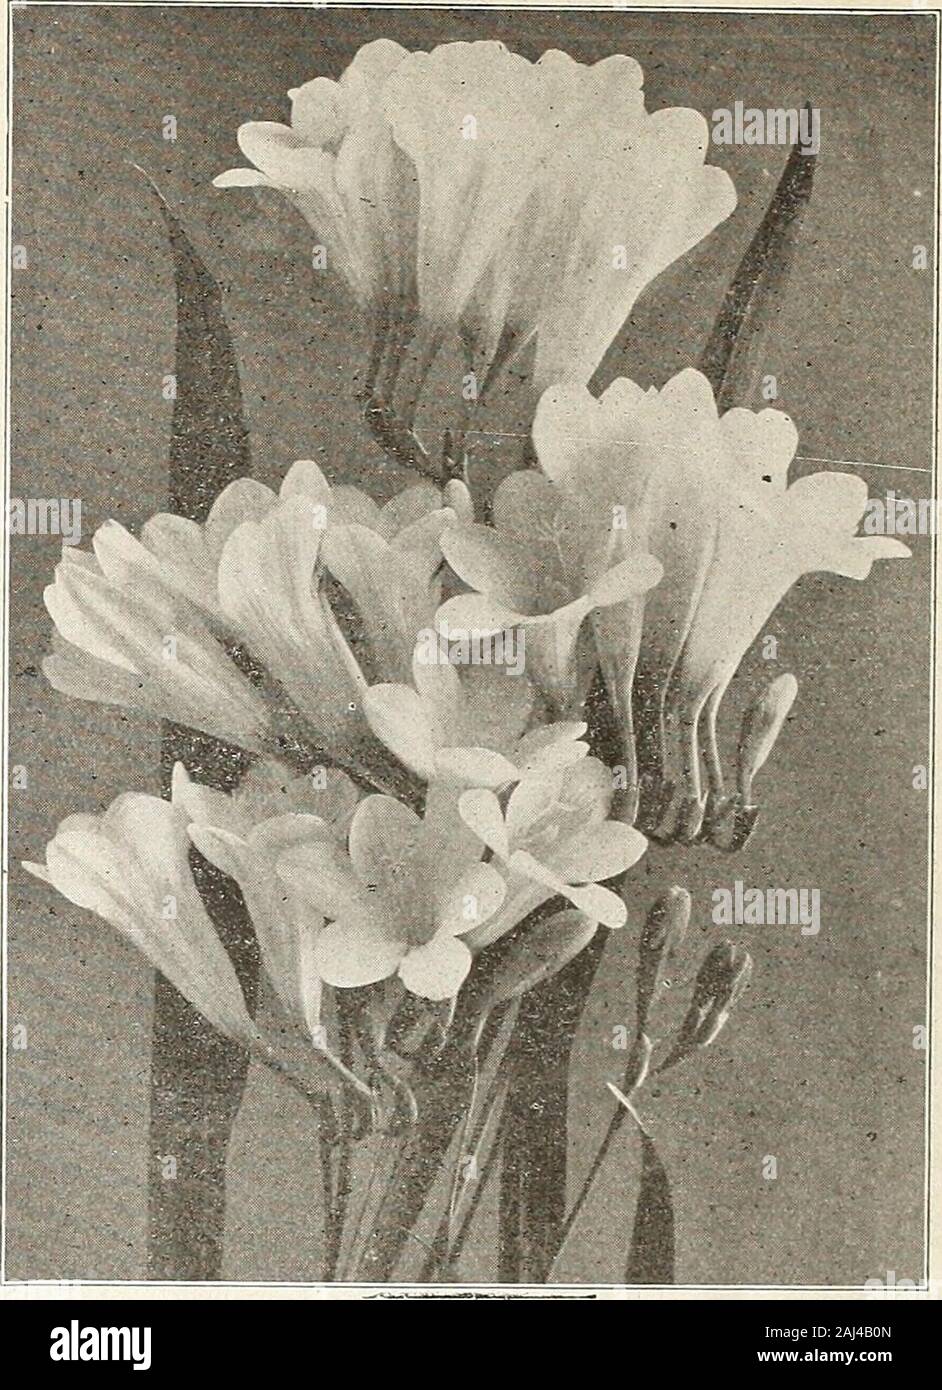 Currie's bulbs and plants : autumn 1913 . LILT OF THE VALLEY. fkeesIa IRIS (Fleur de Lis). All the varieties are beautiful and very effective in the gardenor greenhouse. Use light, rich soil. Cover lightly to protect fromsevere frosts. Spanish (Hispanica)— Doz. 100 Belle Chinoise—Yellow, early $ .15 1.00 Cajanus—Golden yellow, tall -. 15 1.00 Chrysolora—Extra fine, yellow 15 1.00 British Queen—Pure white 15 1.00 Louise—Large, light blue 15 1.00 Spanish—Mixed, blue, yellow 10 .75 English—A lovely, large flowering variety, mixed, va-rious shades of blue, yellow, white, etc 25 1.50 IXIA. Its litt Stock Photo